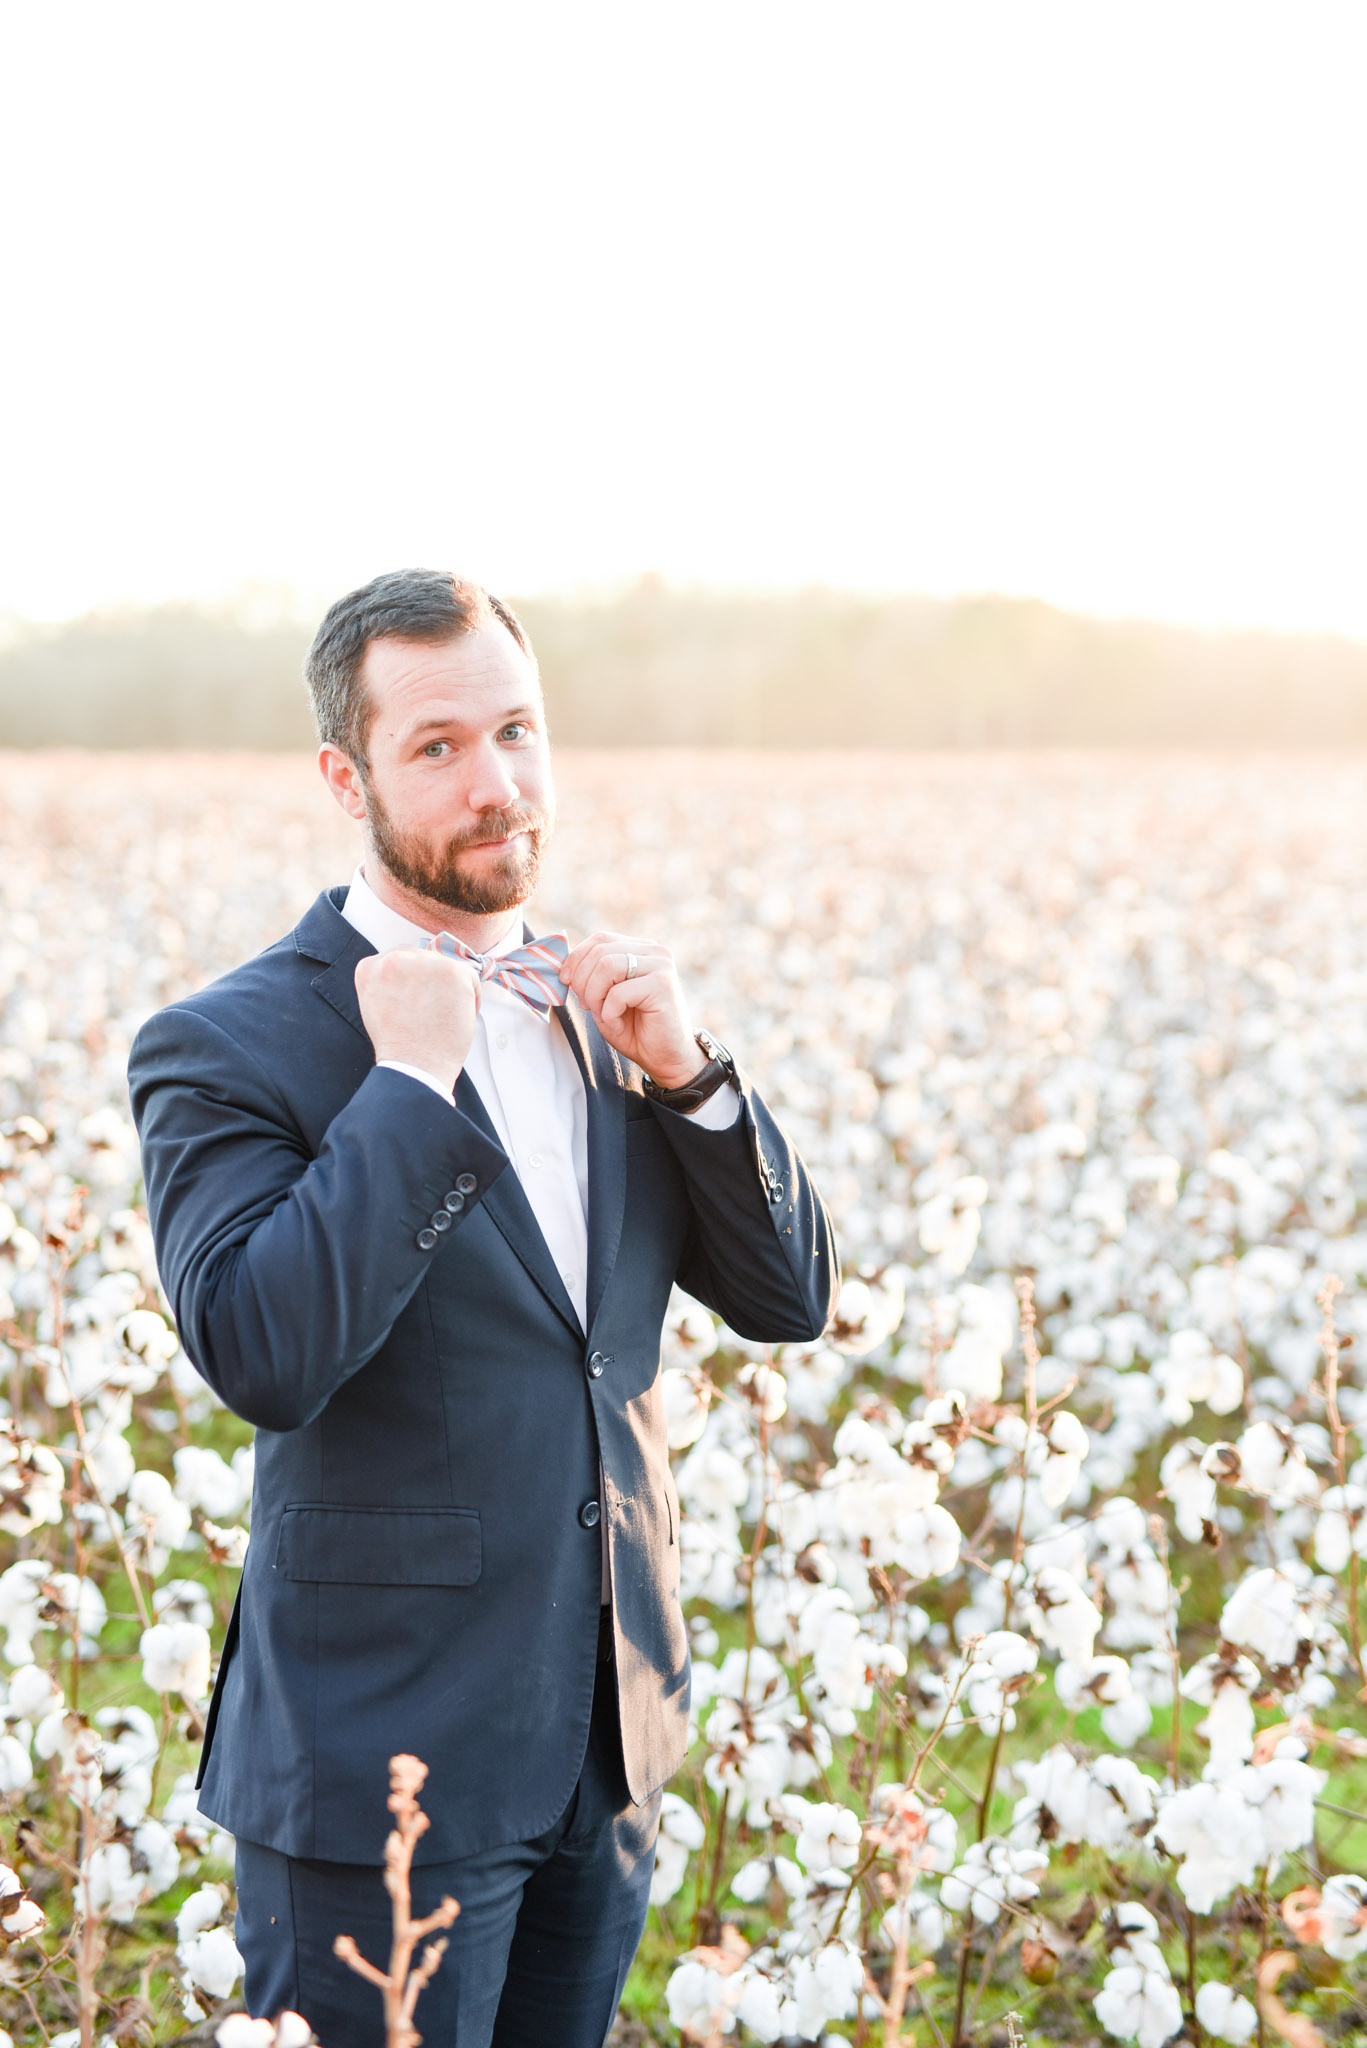 Man straightens bow tie in cotton field at sunset.